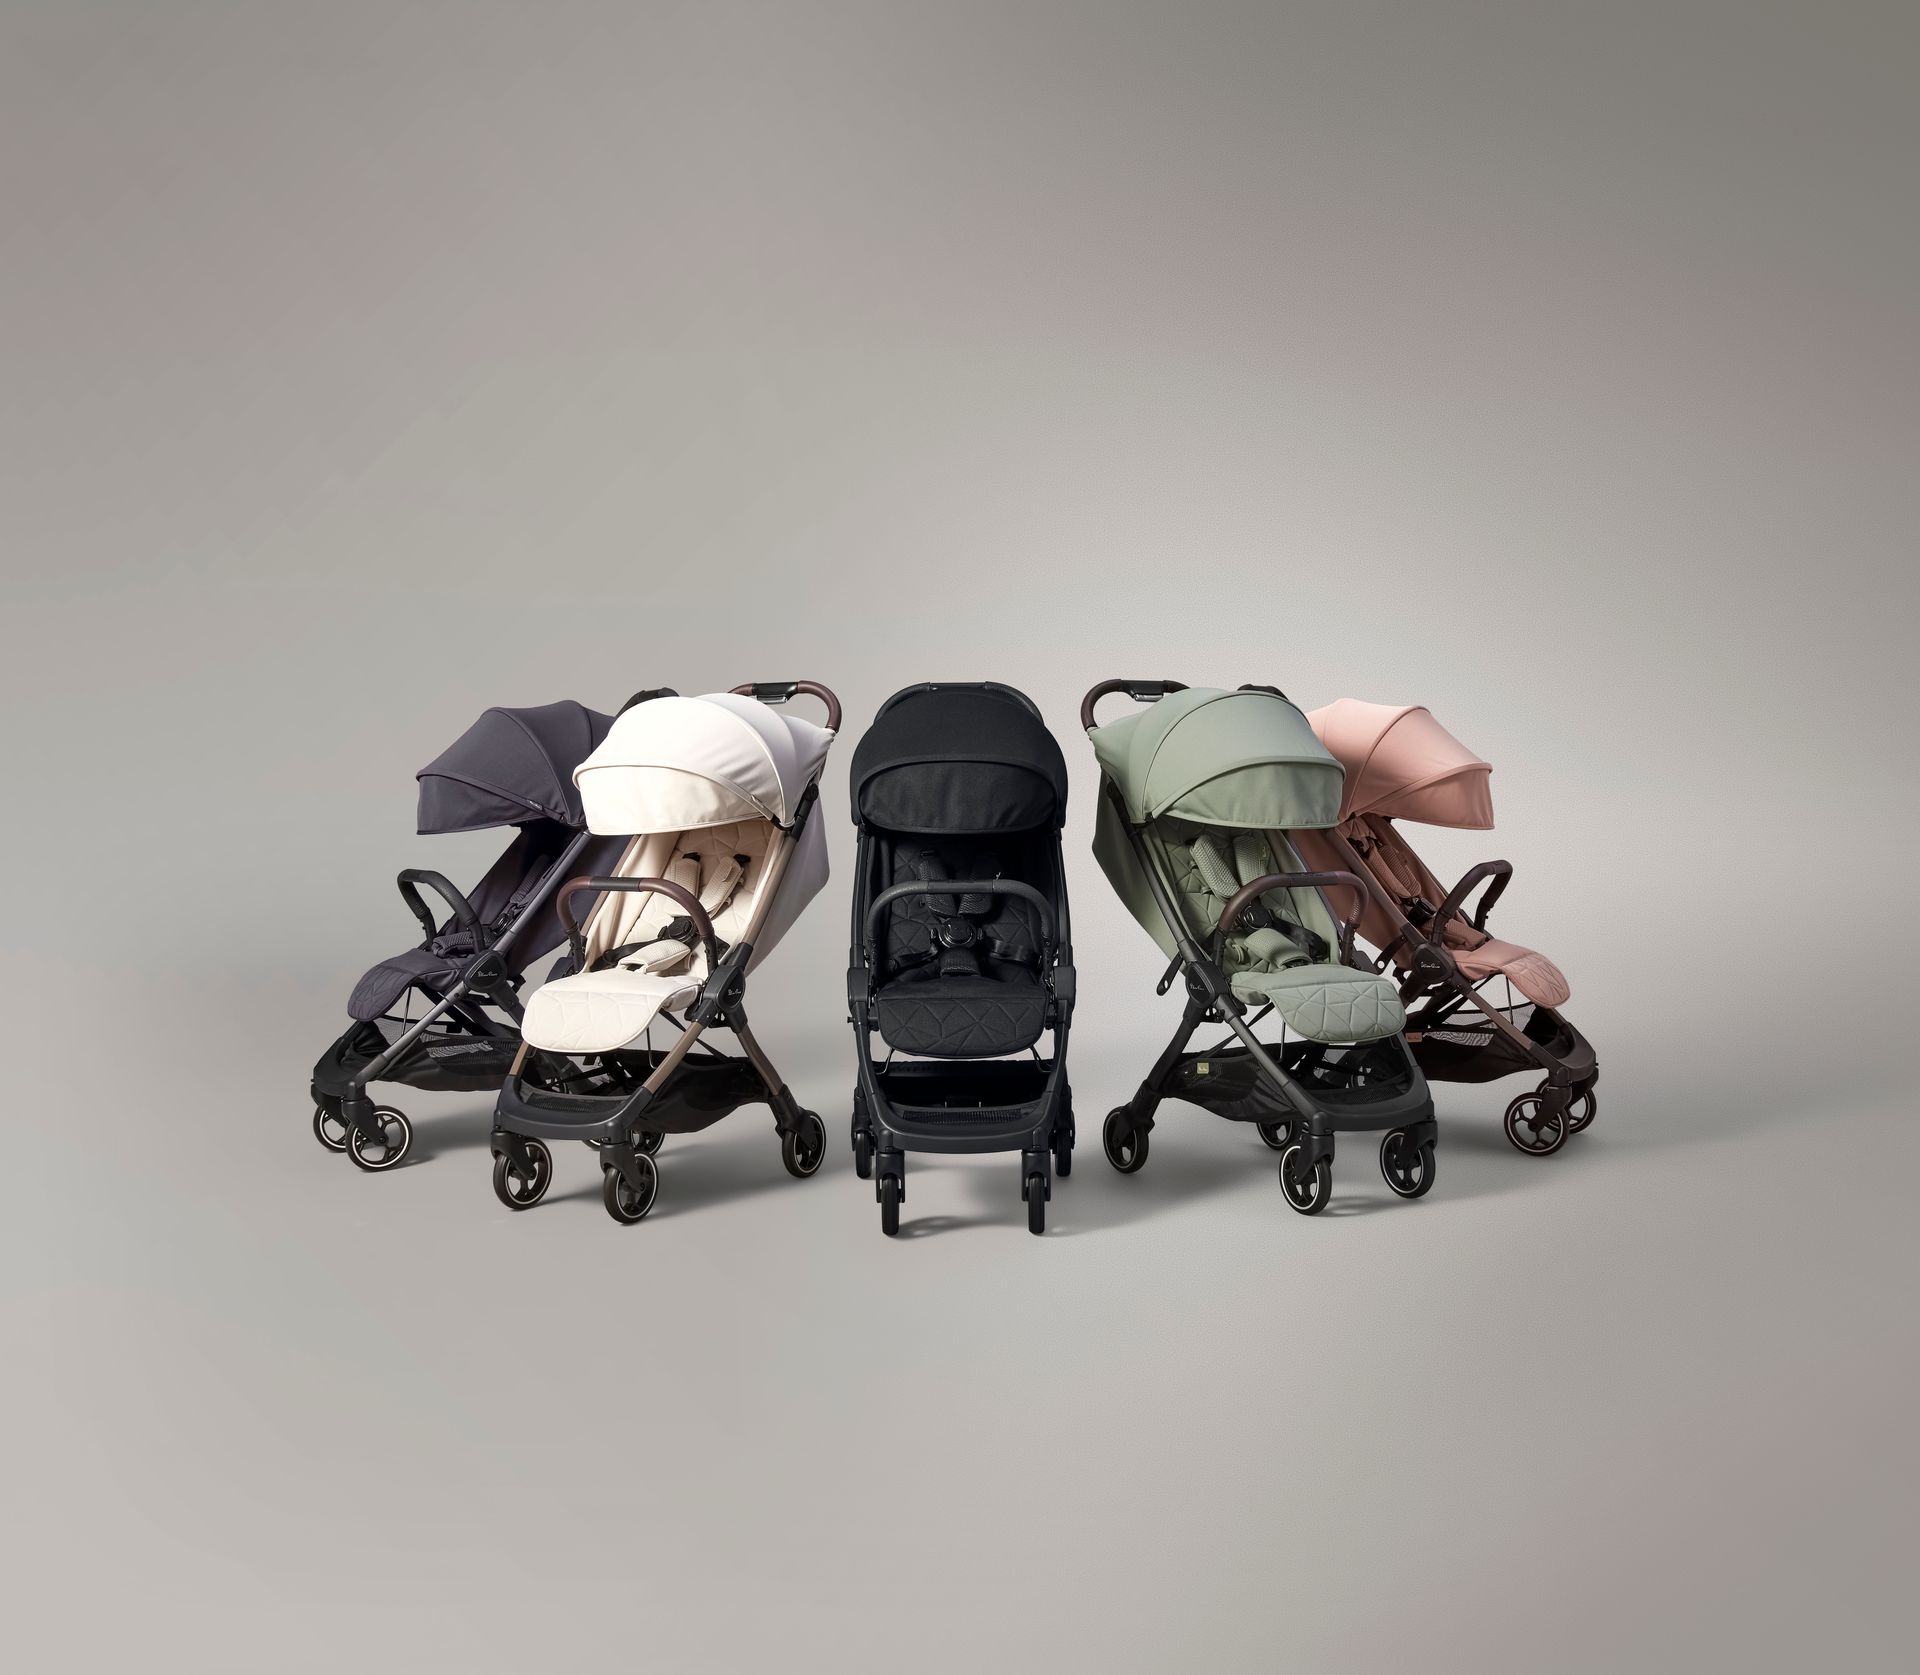 Silver cross clic pushchairs front facing in roebuck, black, almond, sage and space